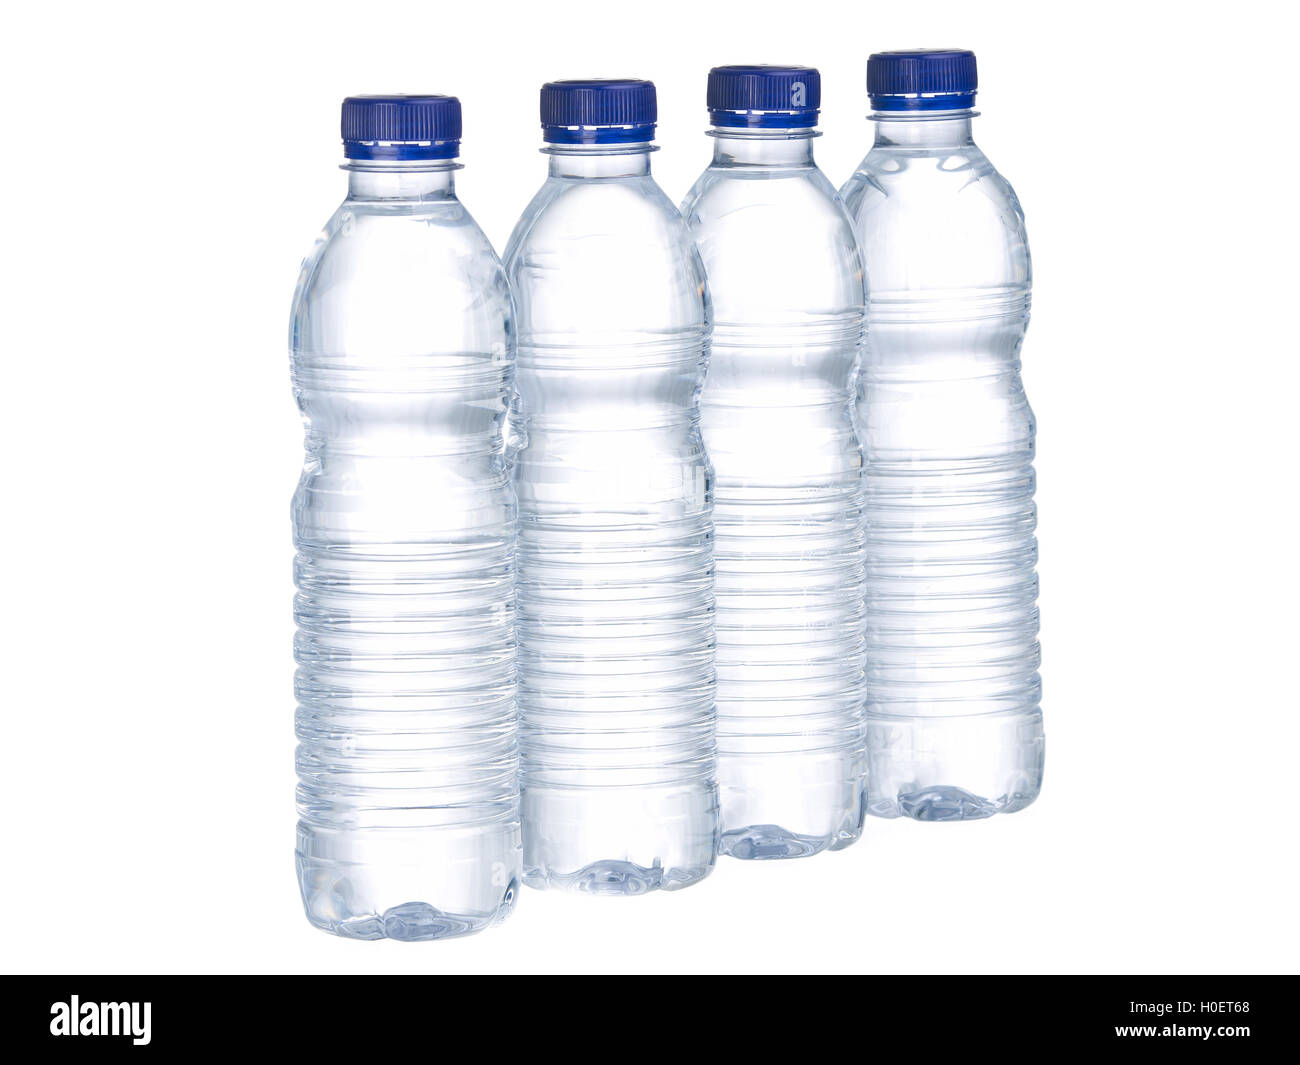 Rows of water bottles isolated on white background Stock Photo